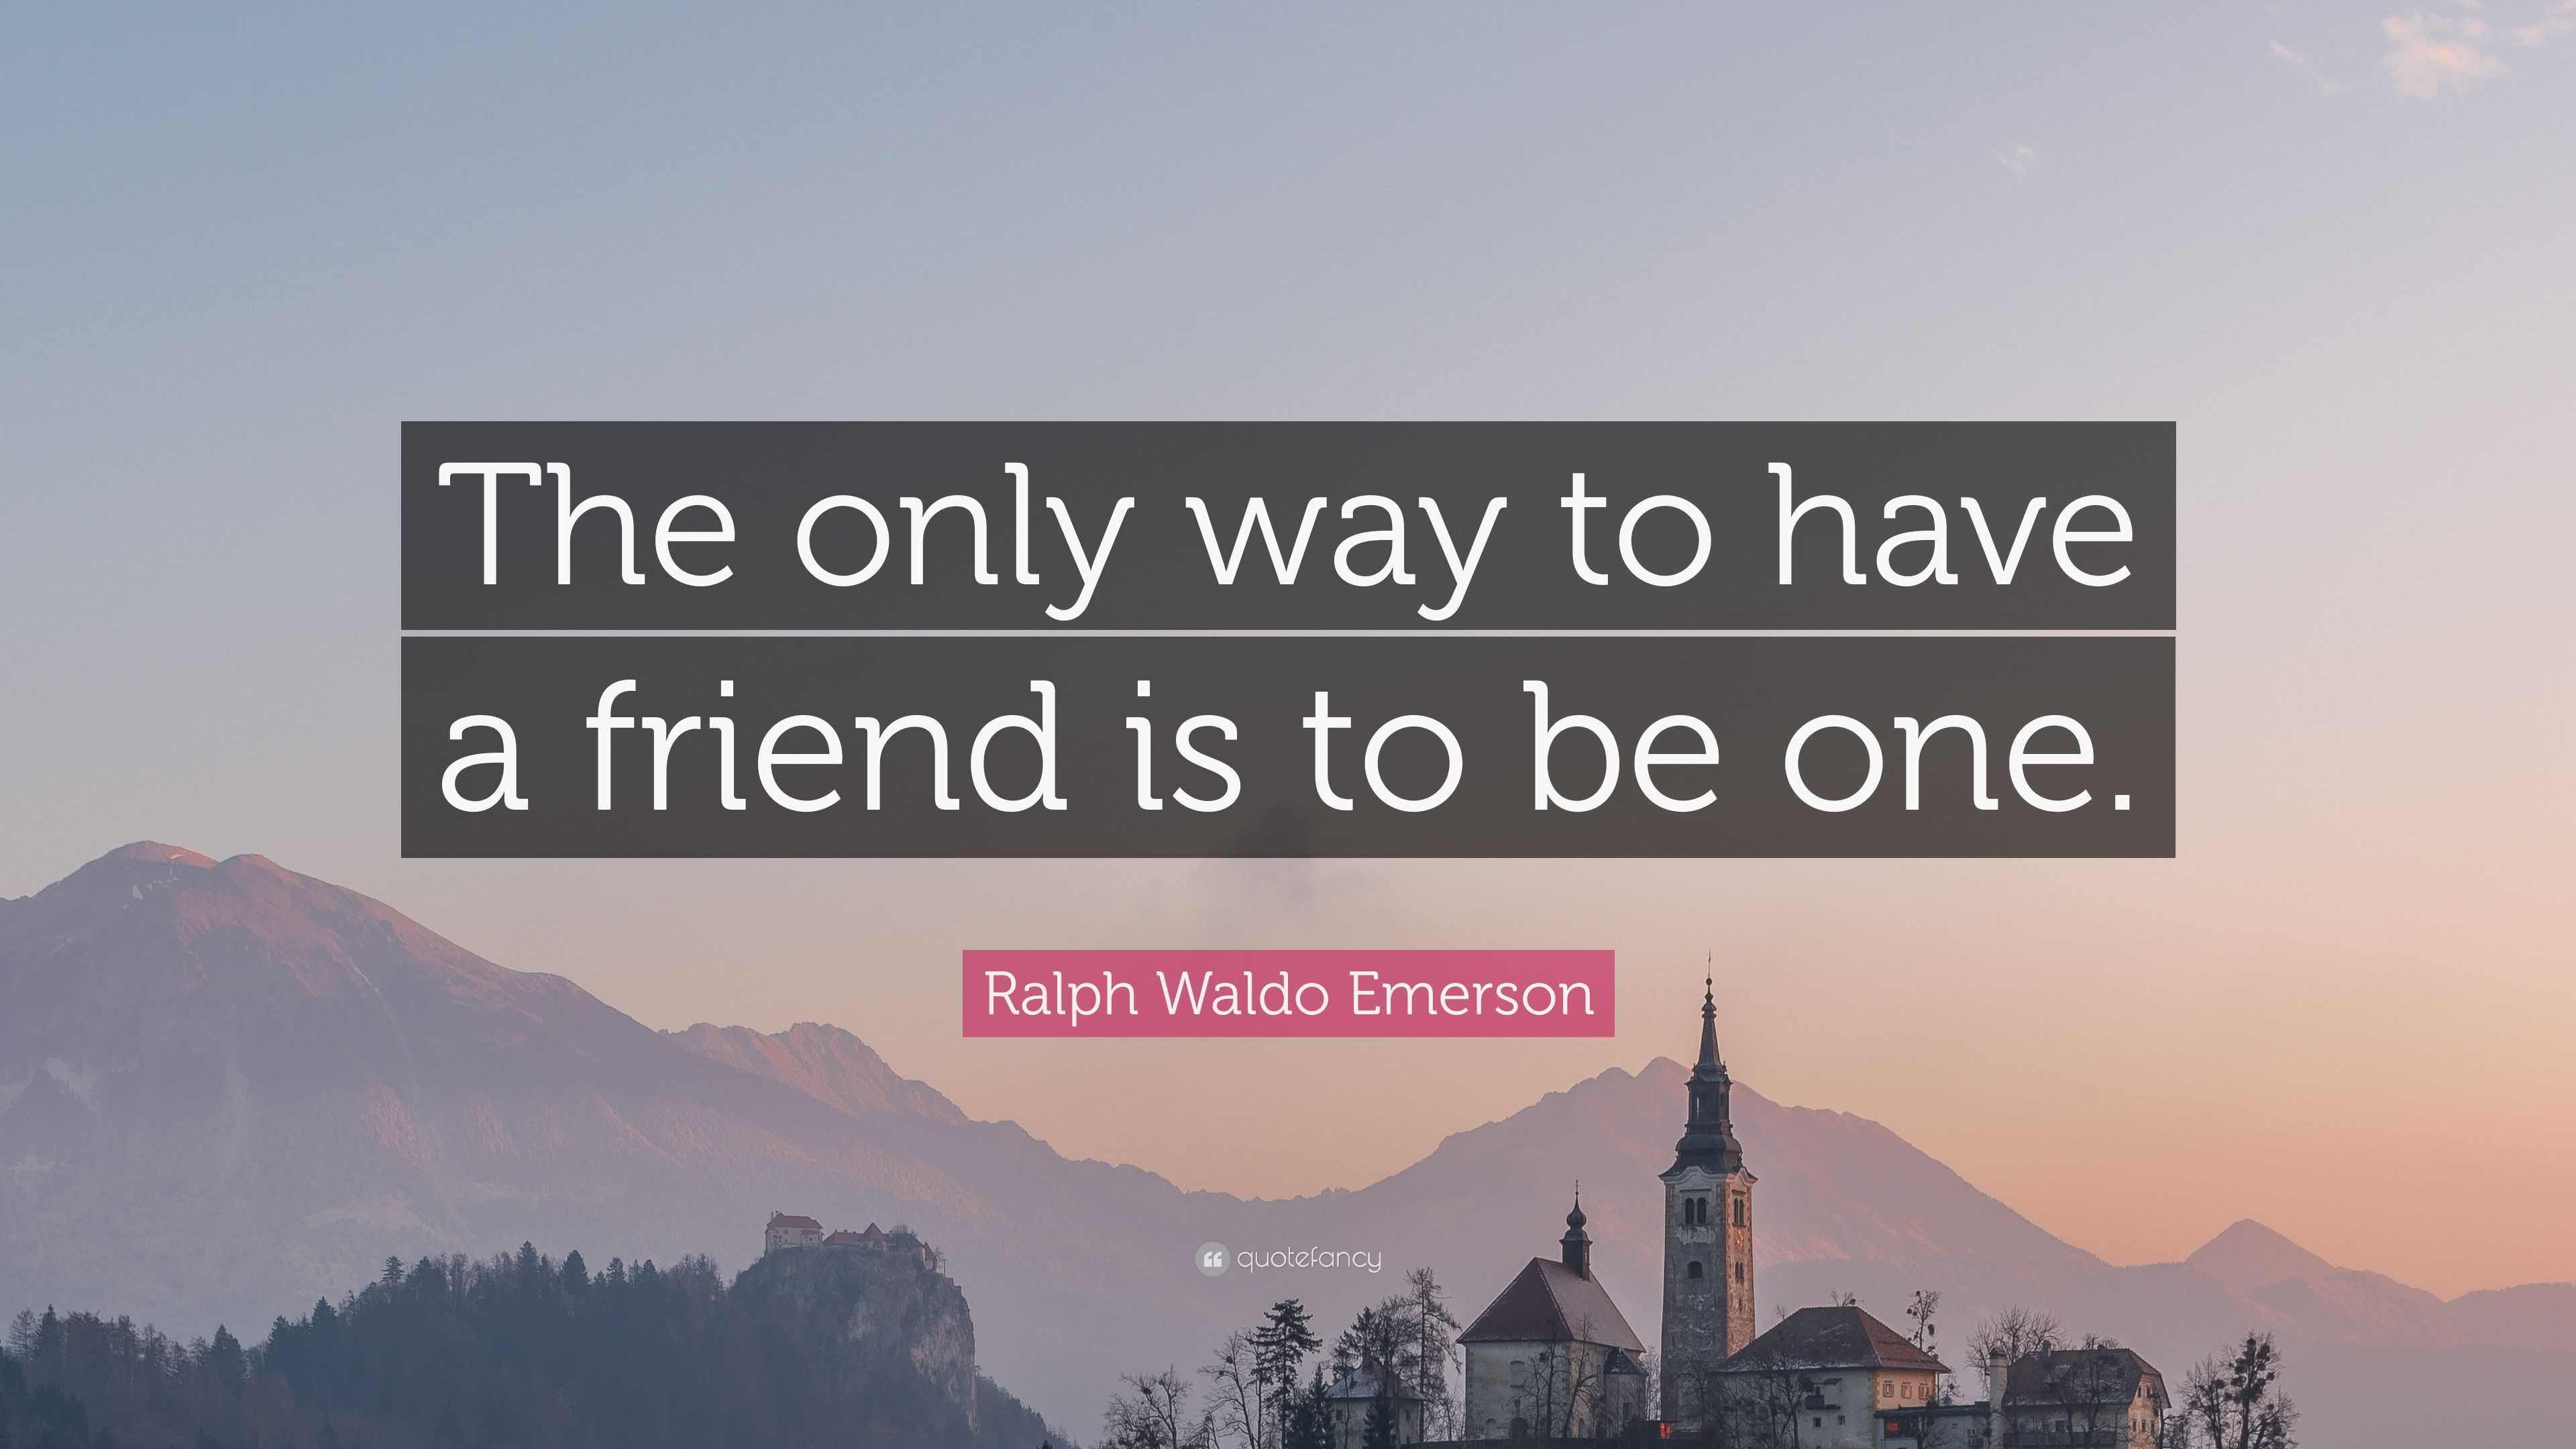 Ralph Waldo Emerson Quote: “The only way to have a friend is to be one.”